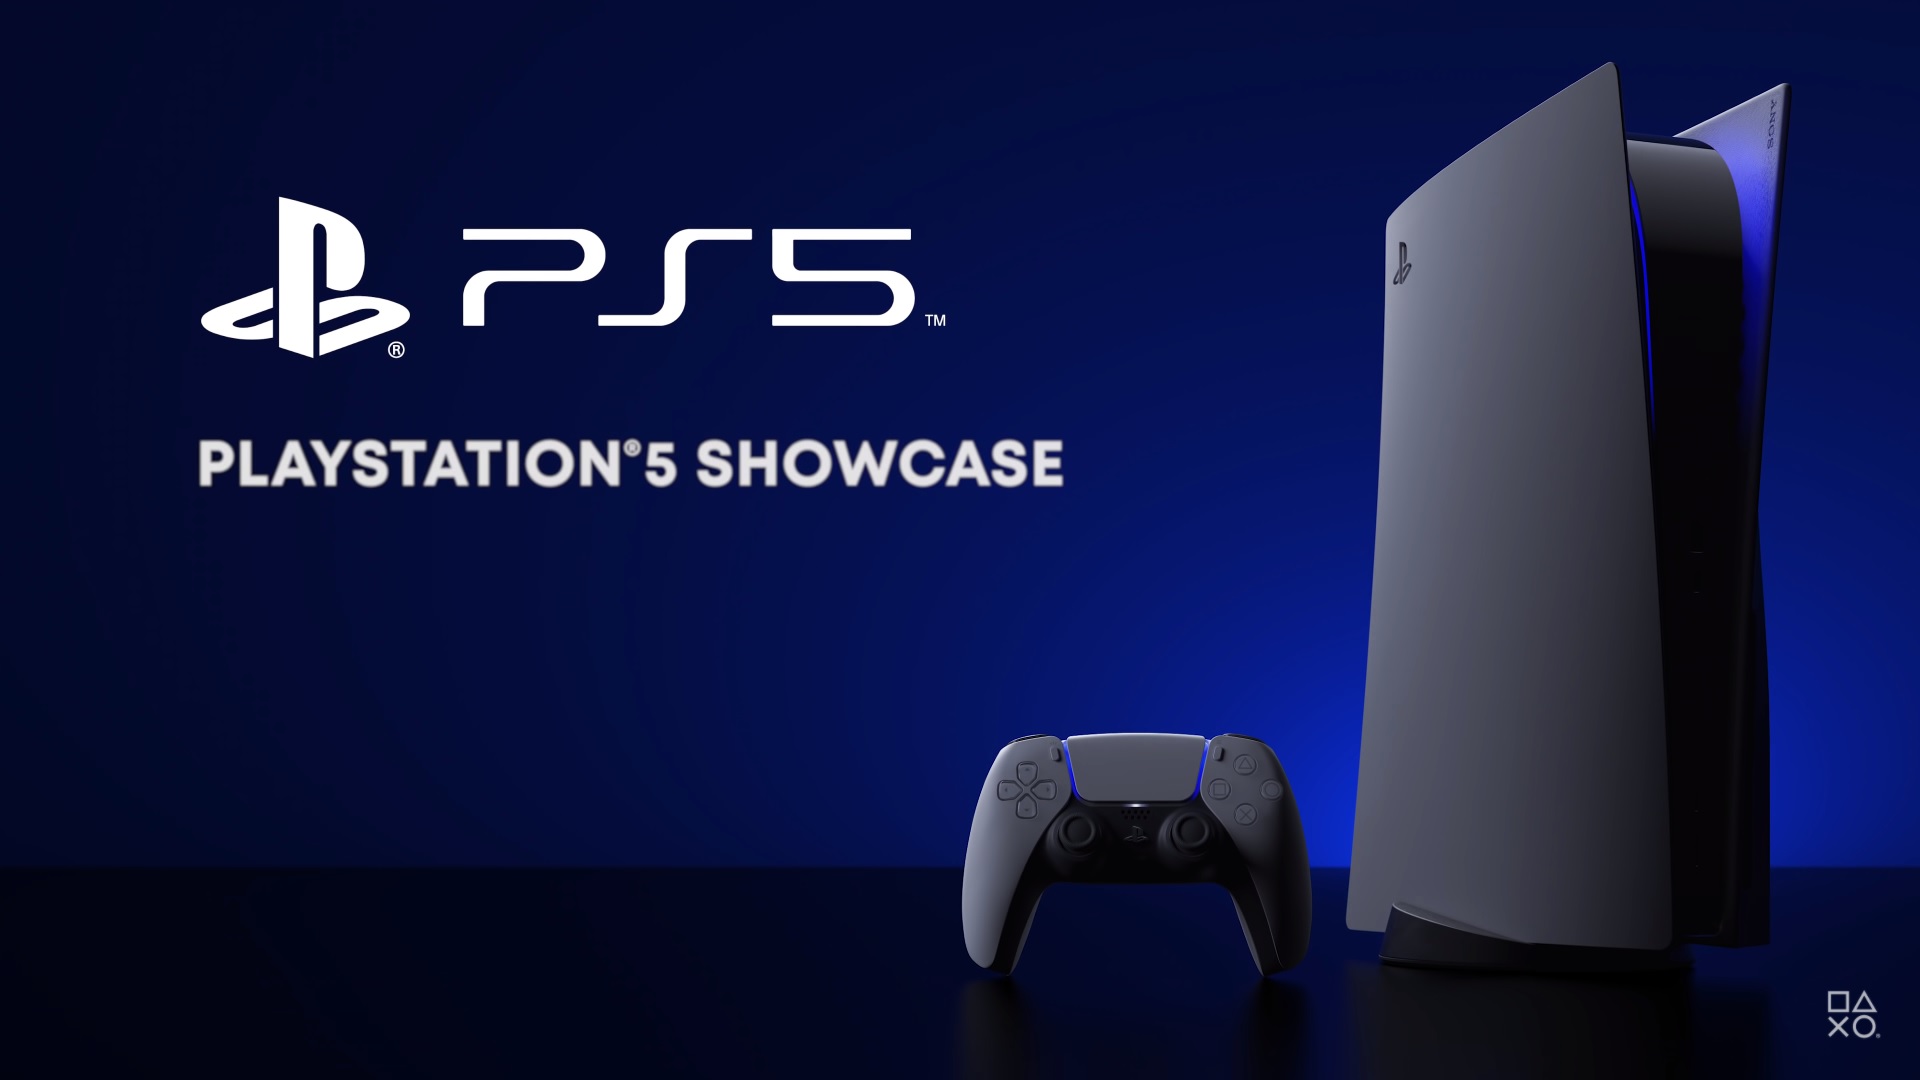 PS5 Showcase event on September 16: Watch the live stream here 